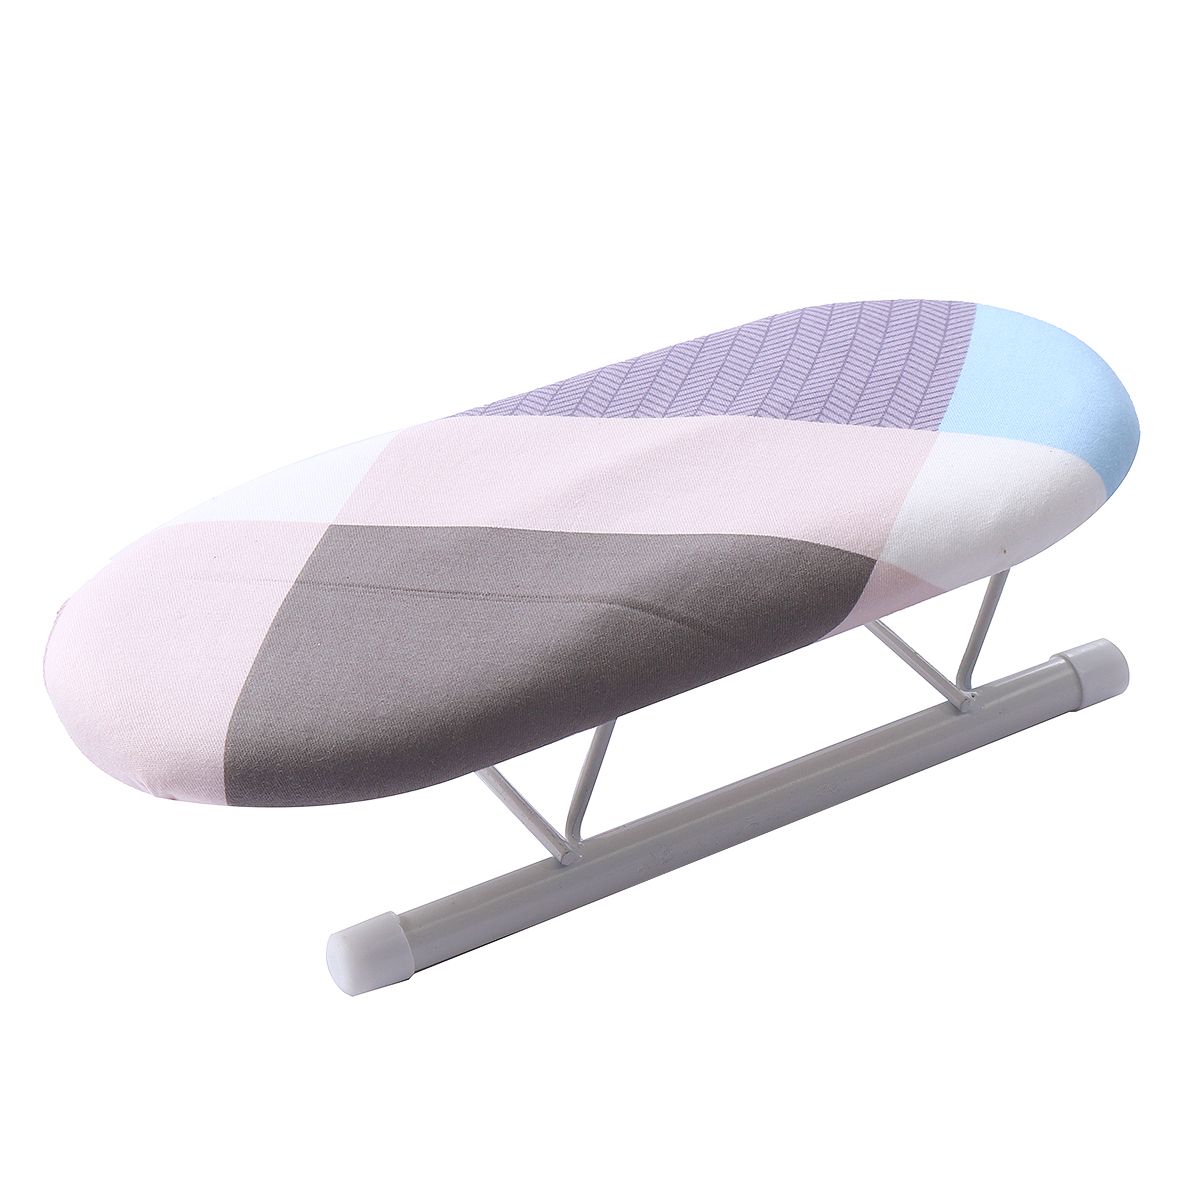 Ironing-Board-With-Retractable-Iron-Rest-Folding-Ironing-Board-Adjustbale-Space-Saving-Ironing-Table-1631618